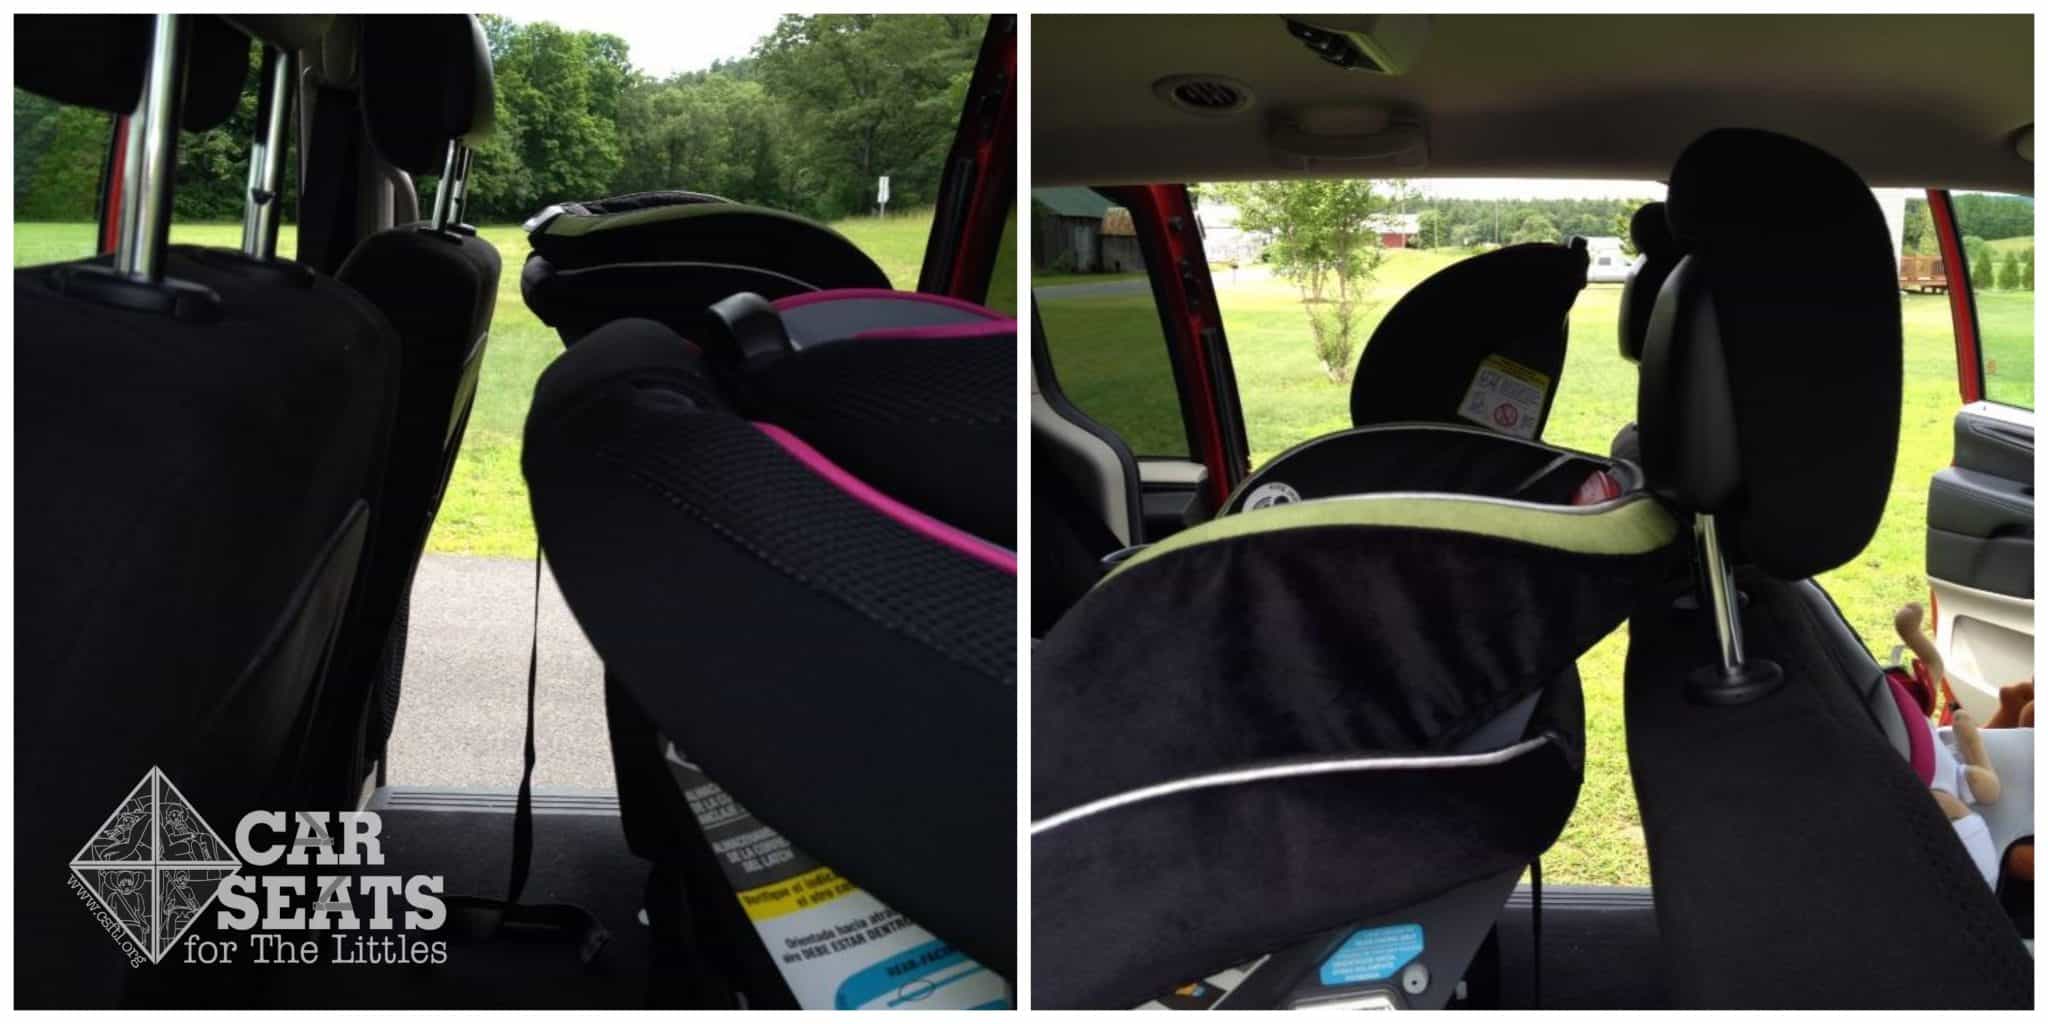 Graco 4Ever rear facing room comparison with Graco My Size